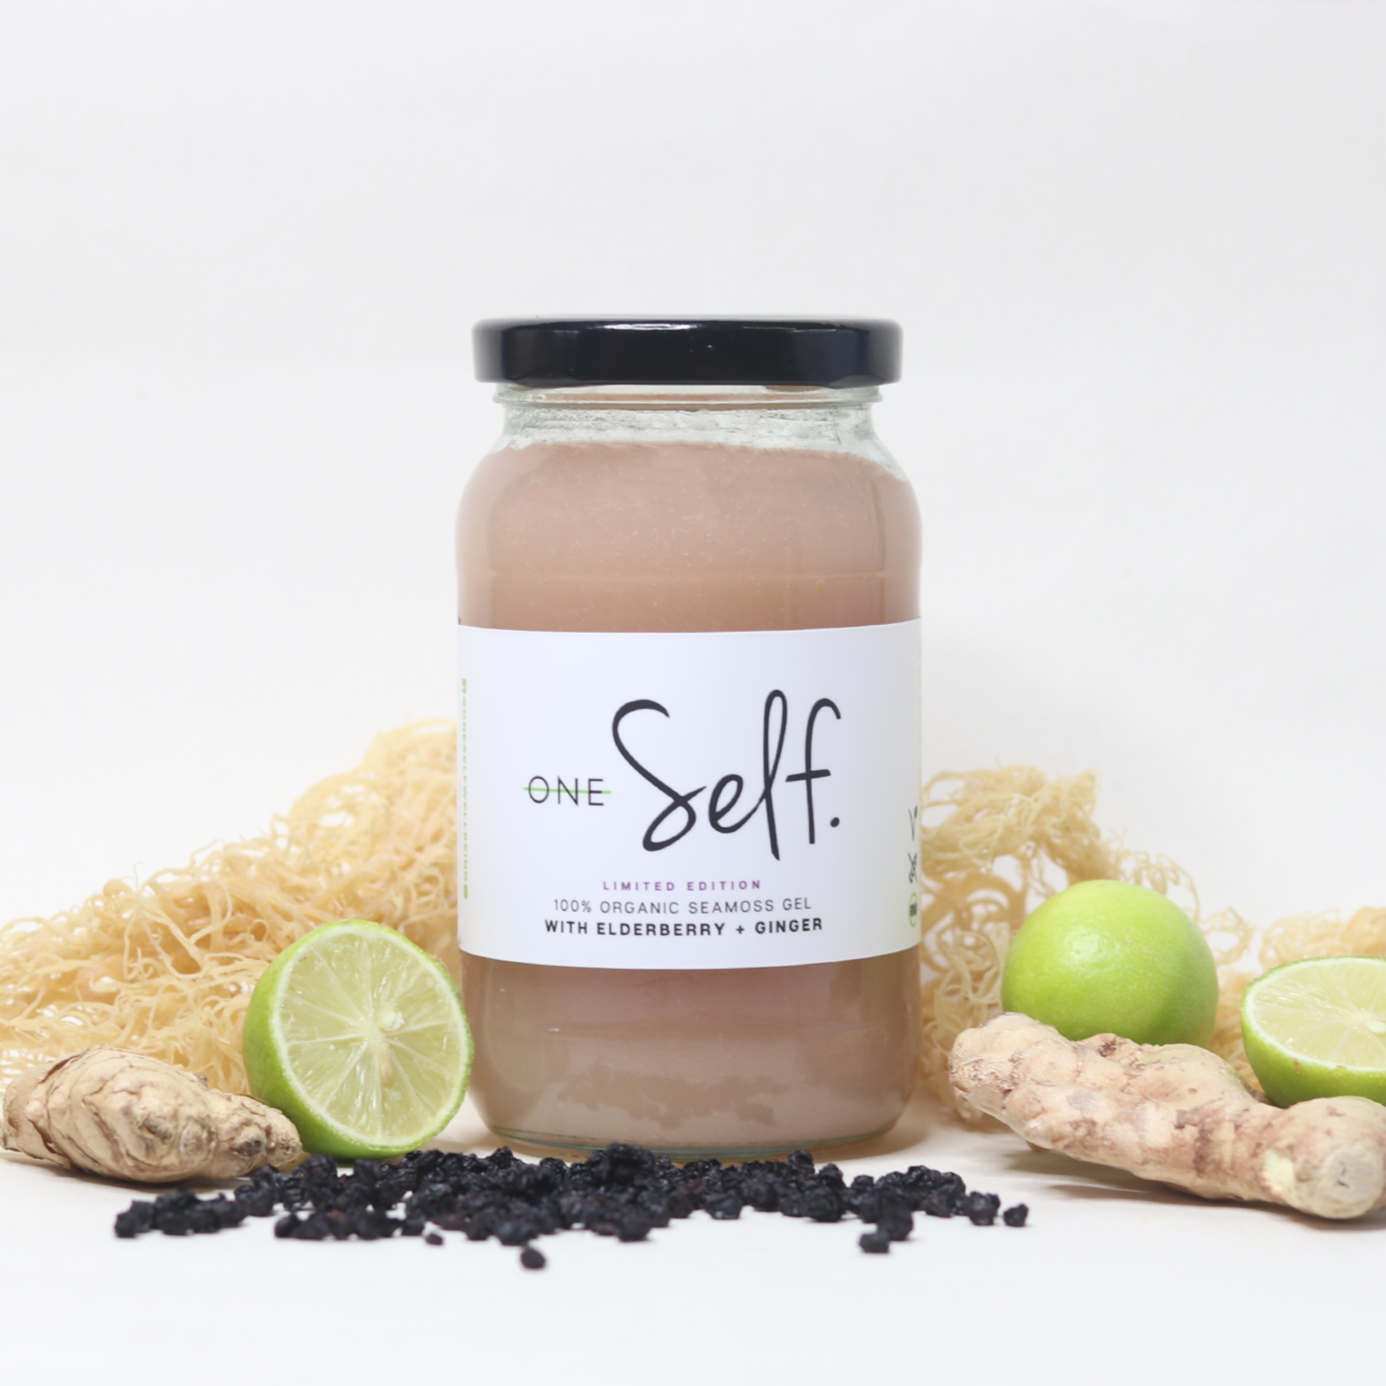 Sea Moss Gel with Elderberry + Ginger feature image